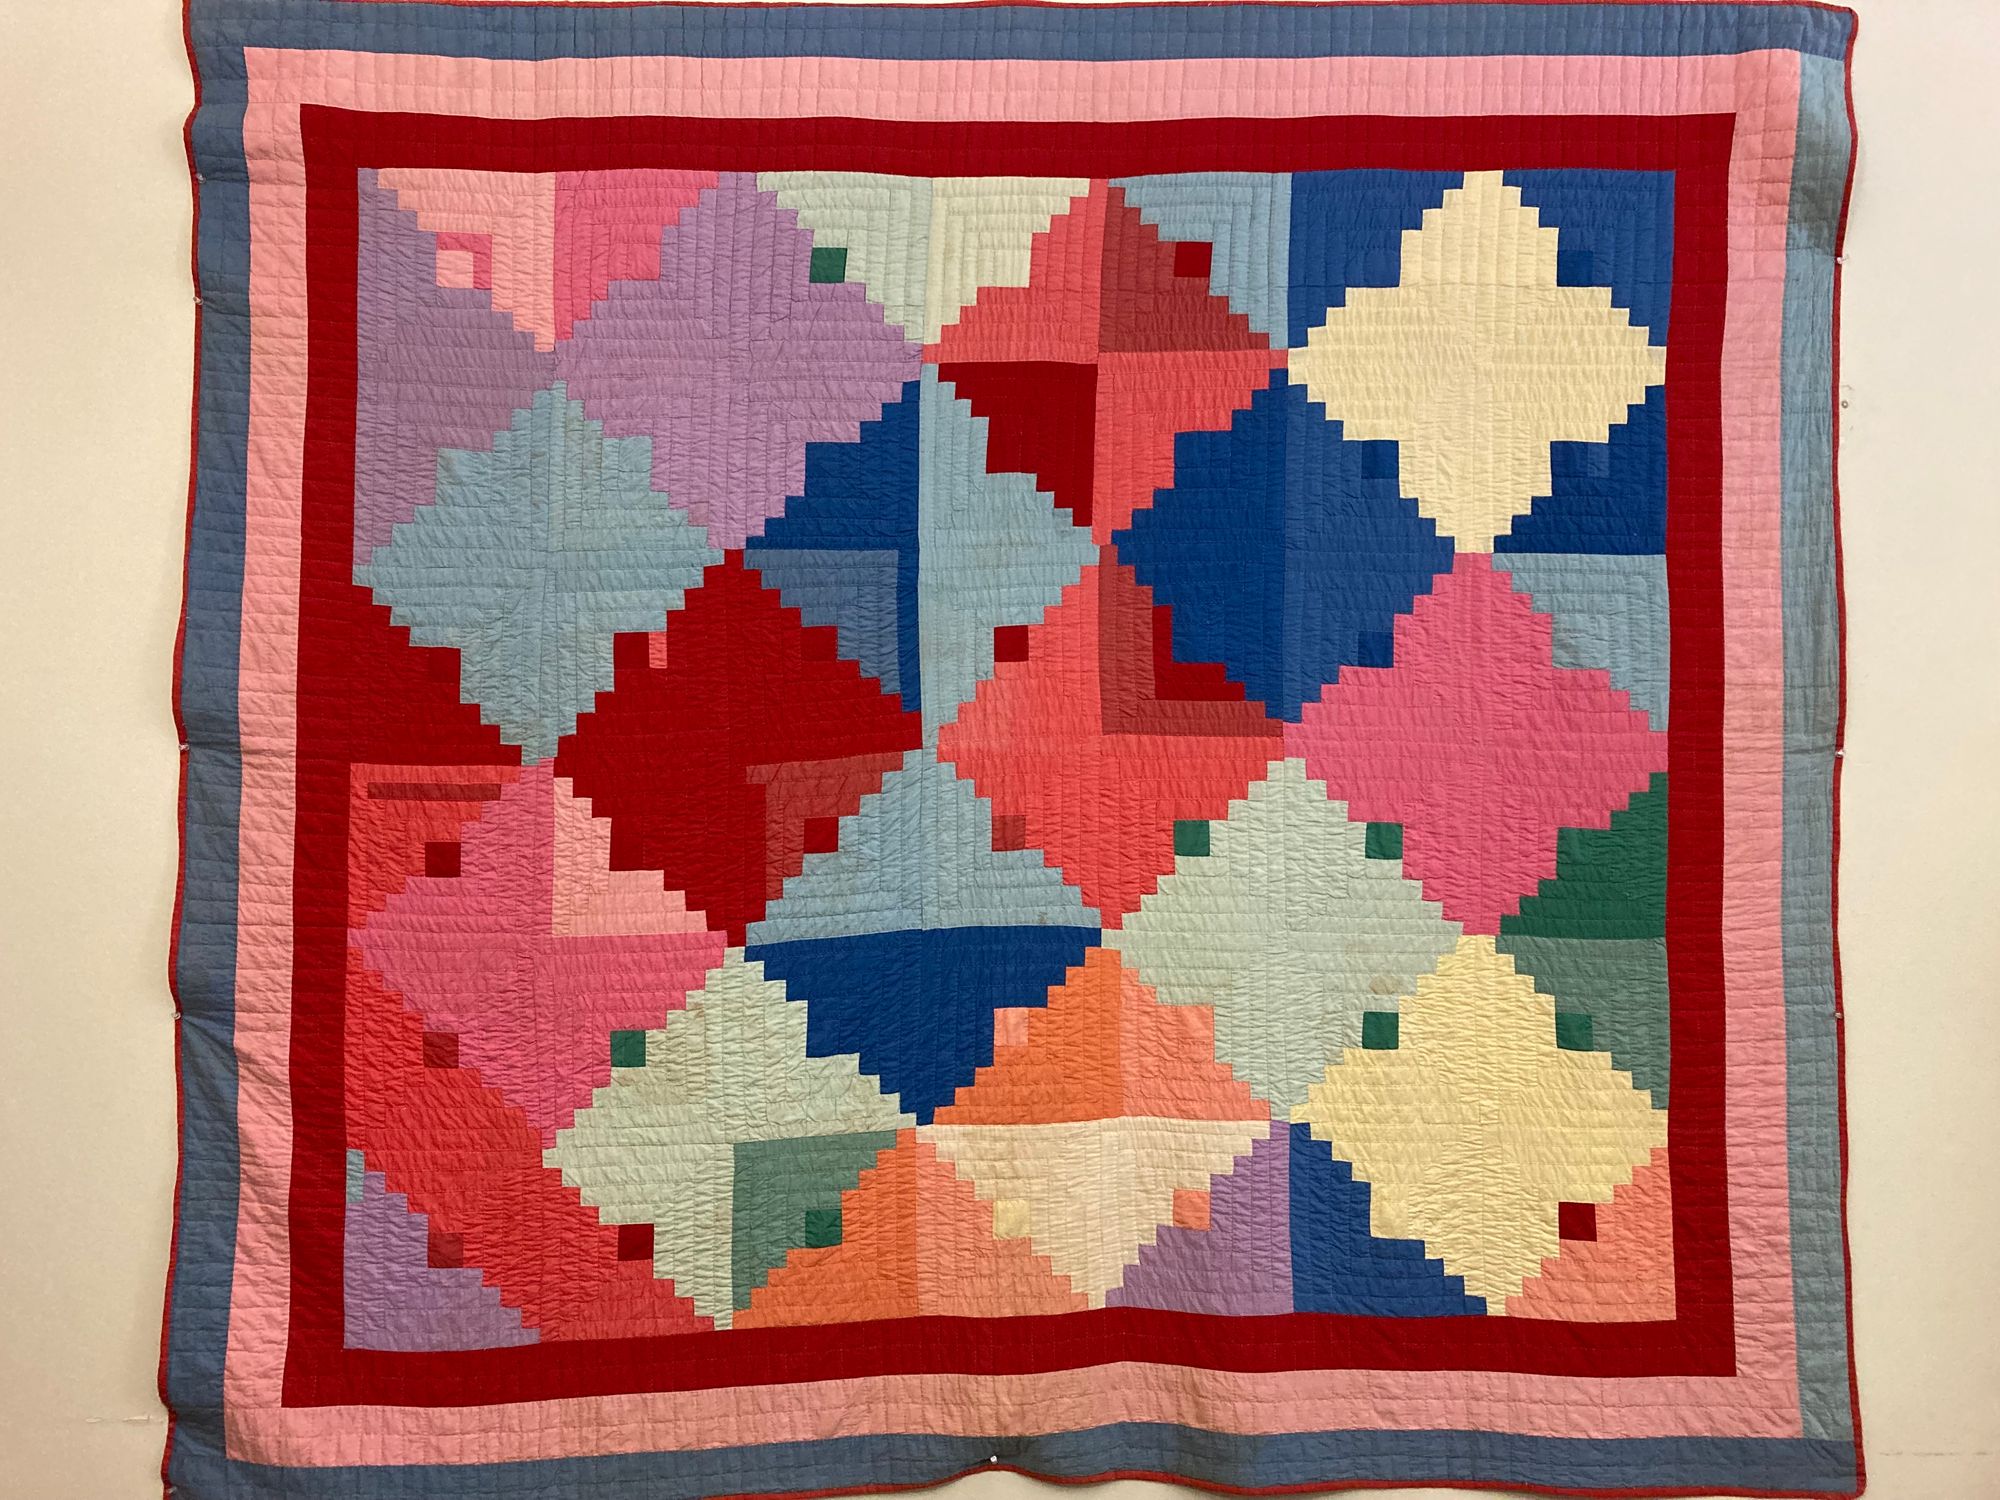 A colorful quilt hanging on a wall